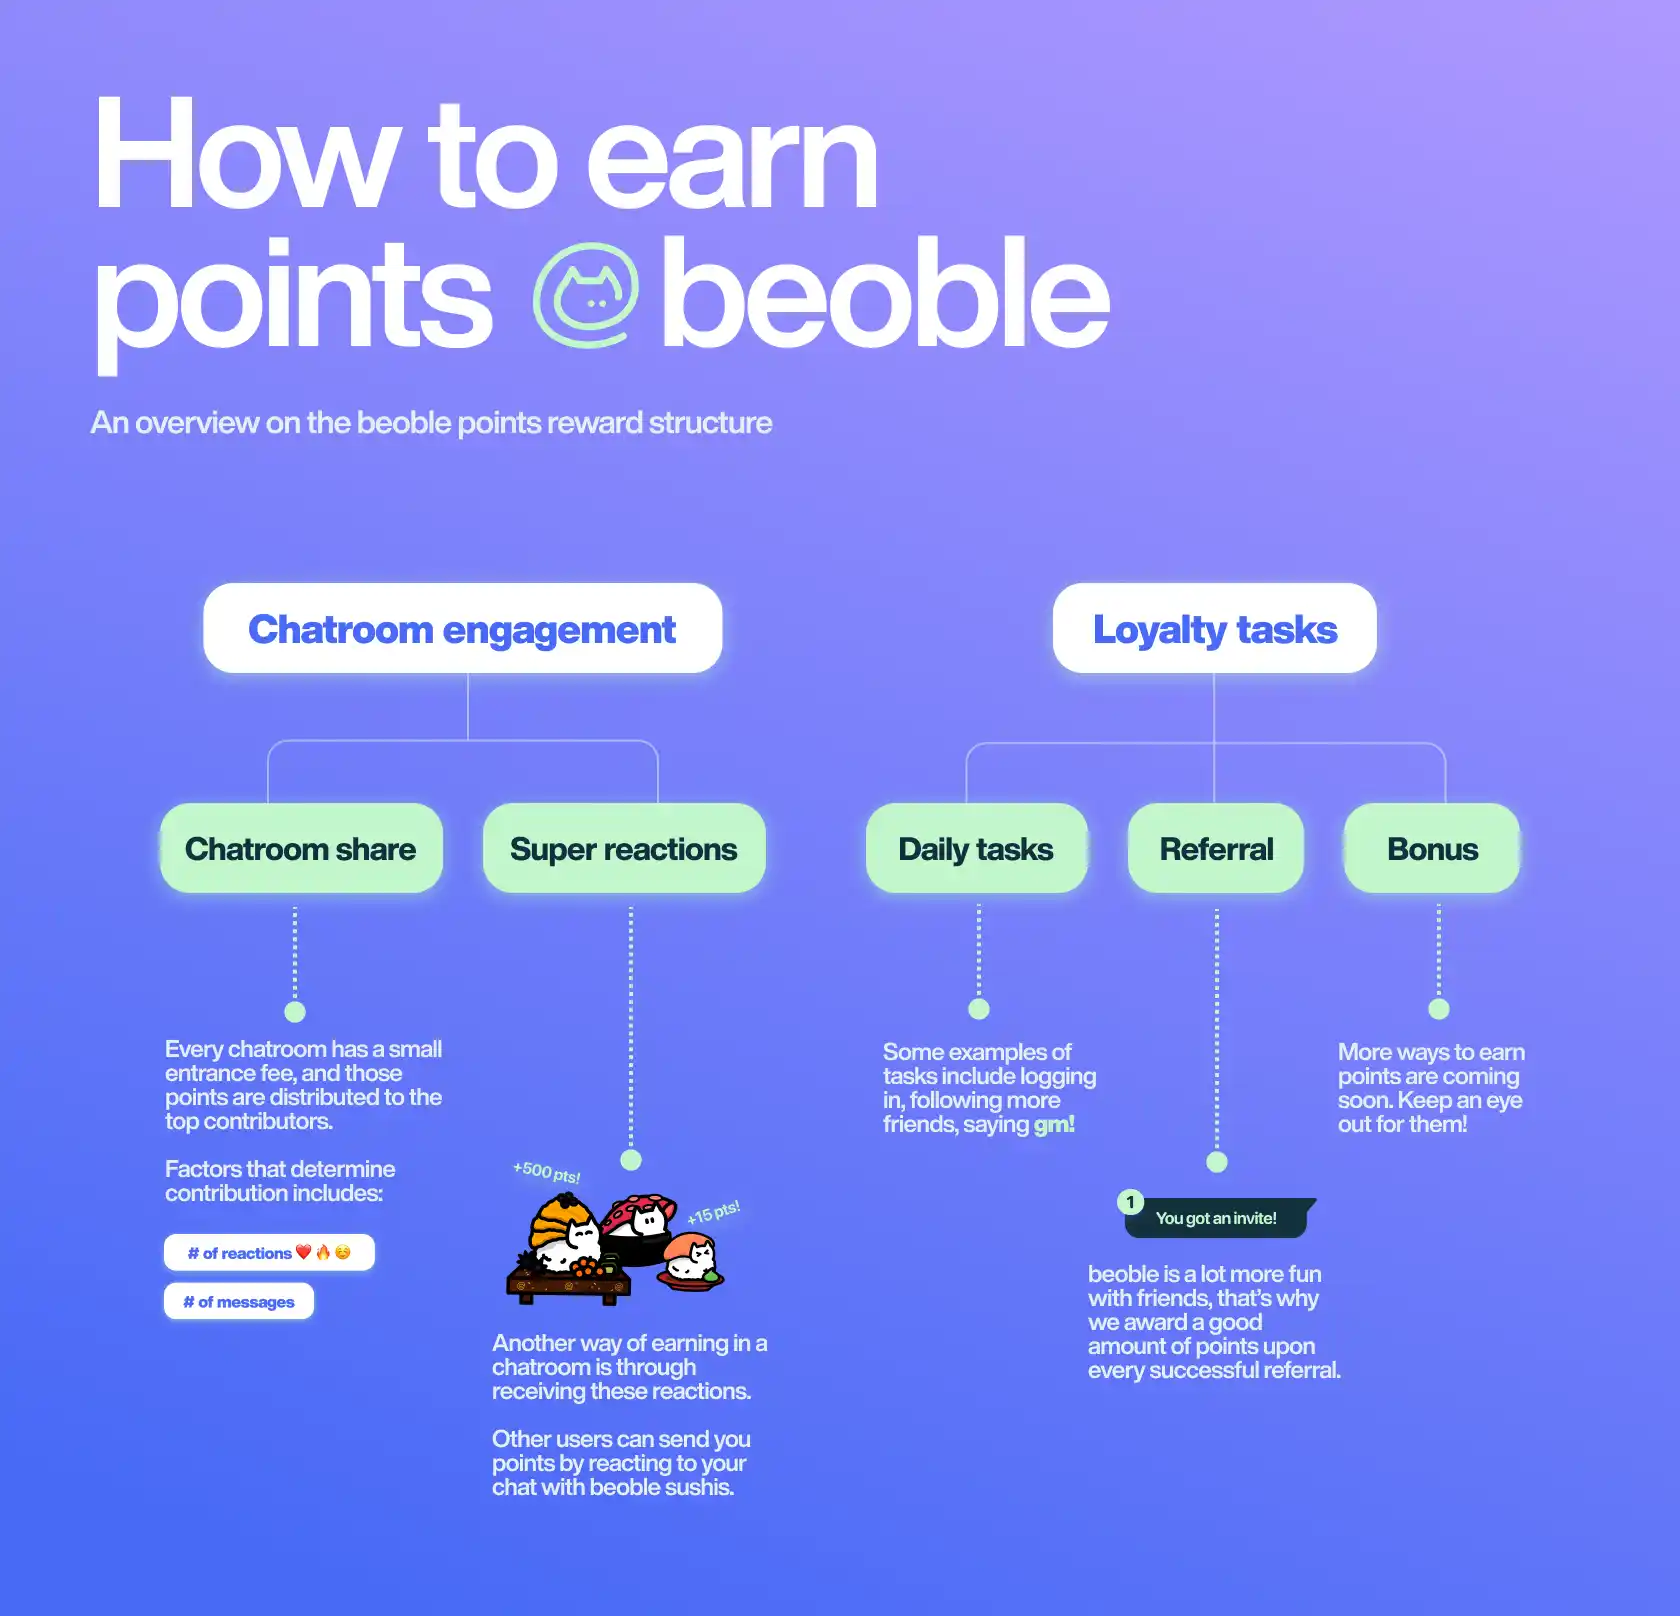 What is Beoble?